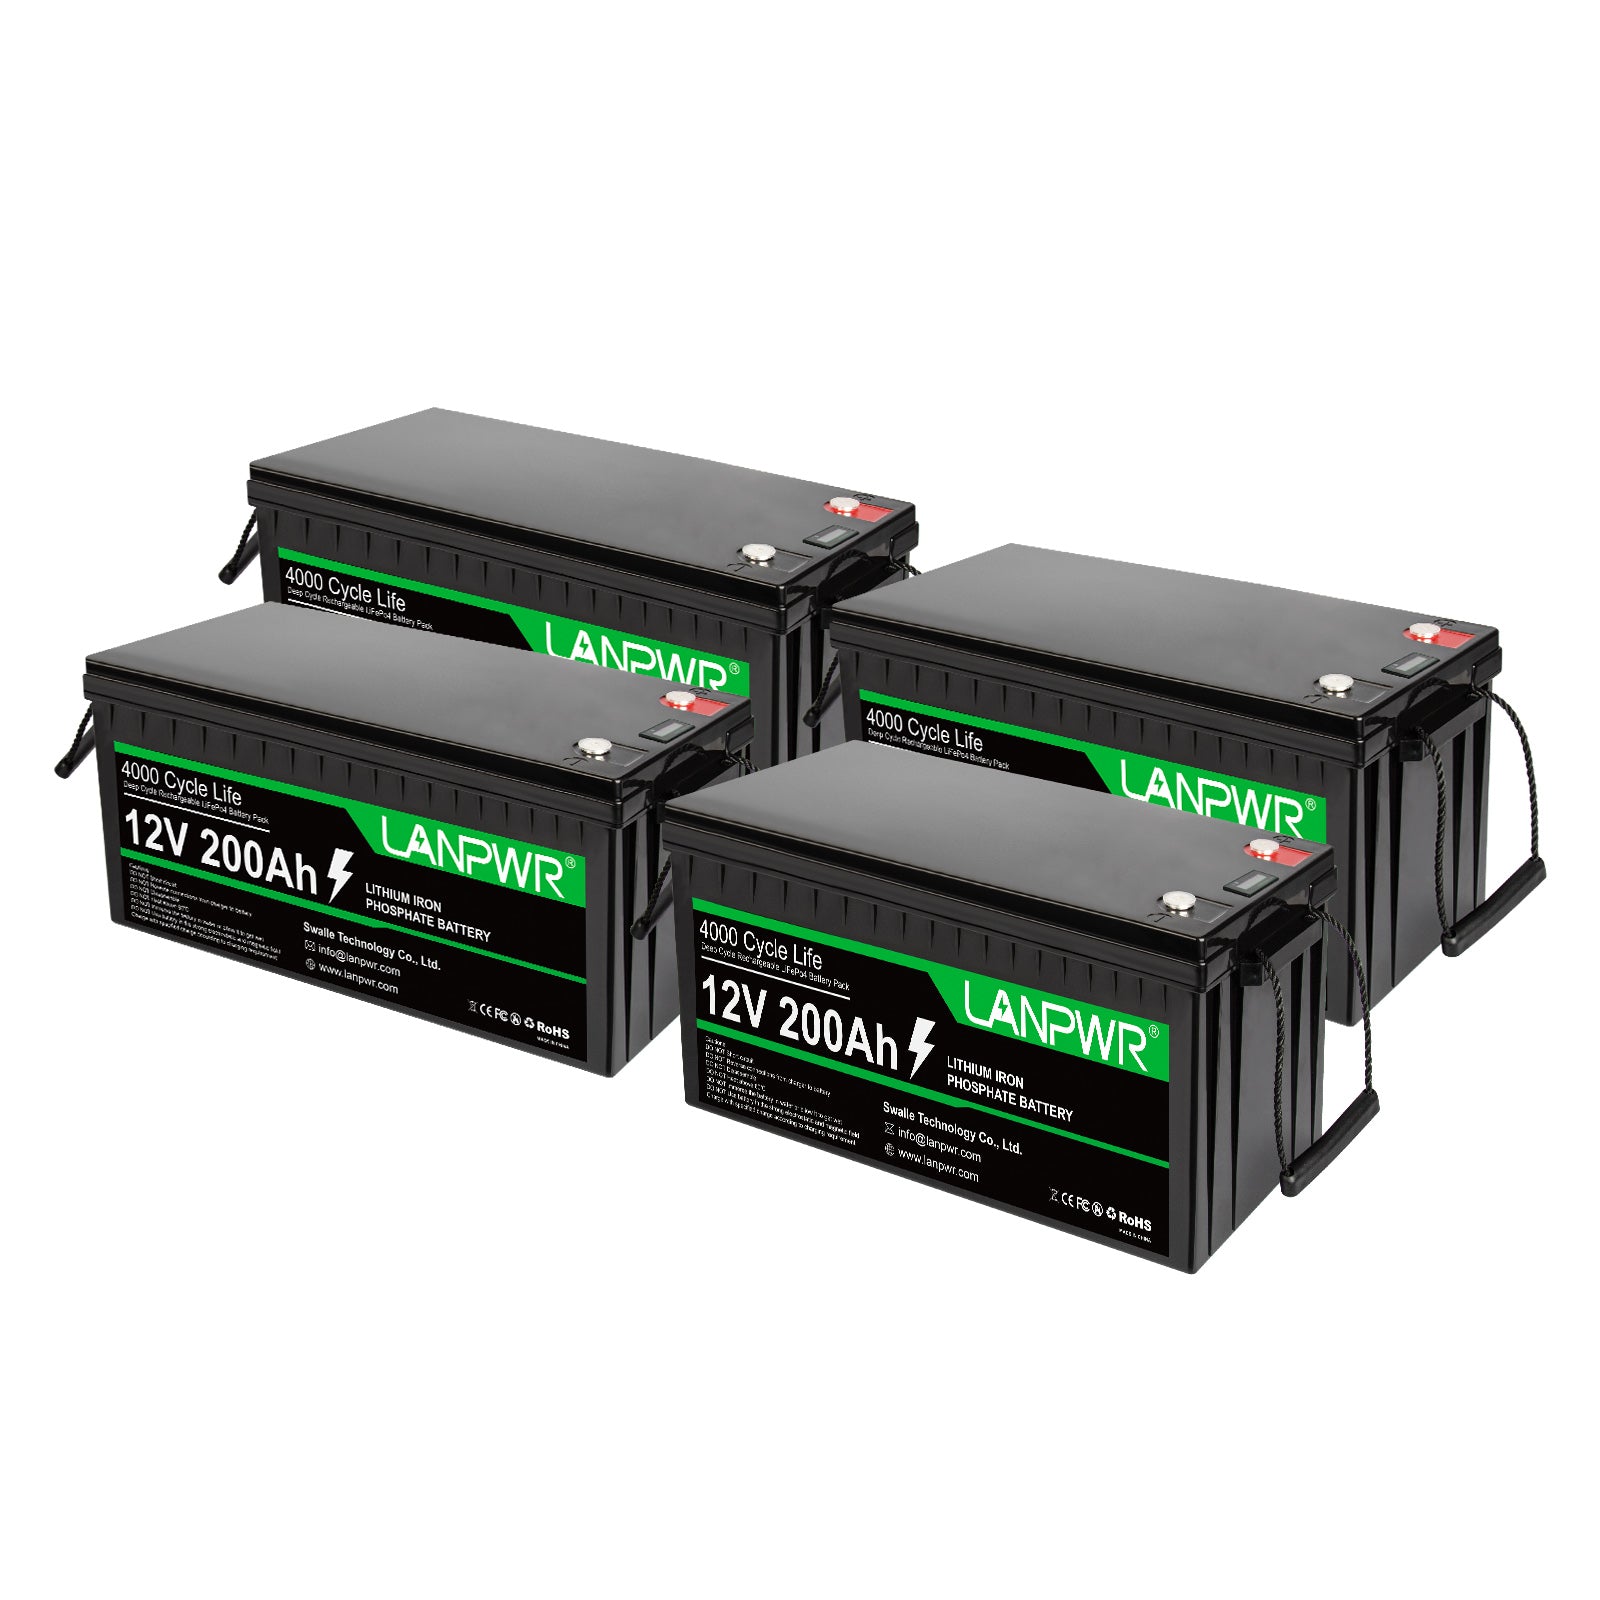 LANPWR 12V 200Ah Plus LiFePO4 Battery, 2560Wh Energy, Built-In 200A BMS, 2560W Load Power